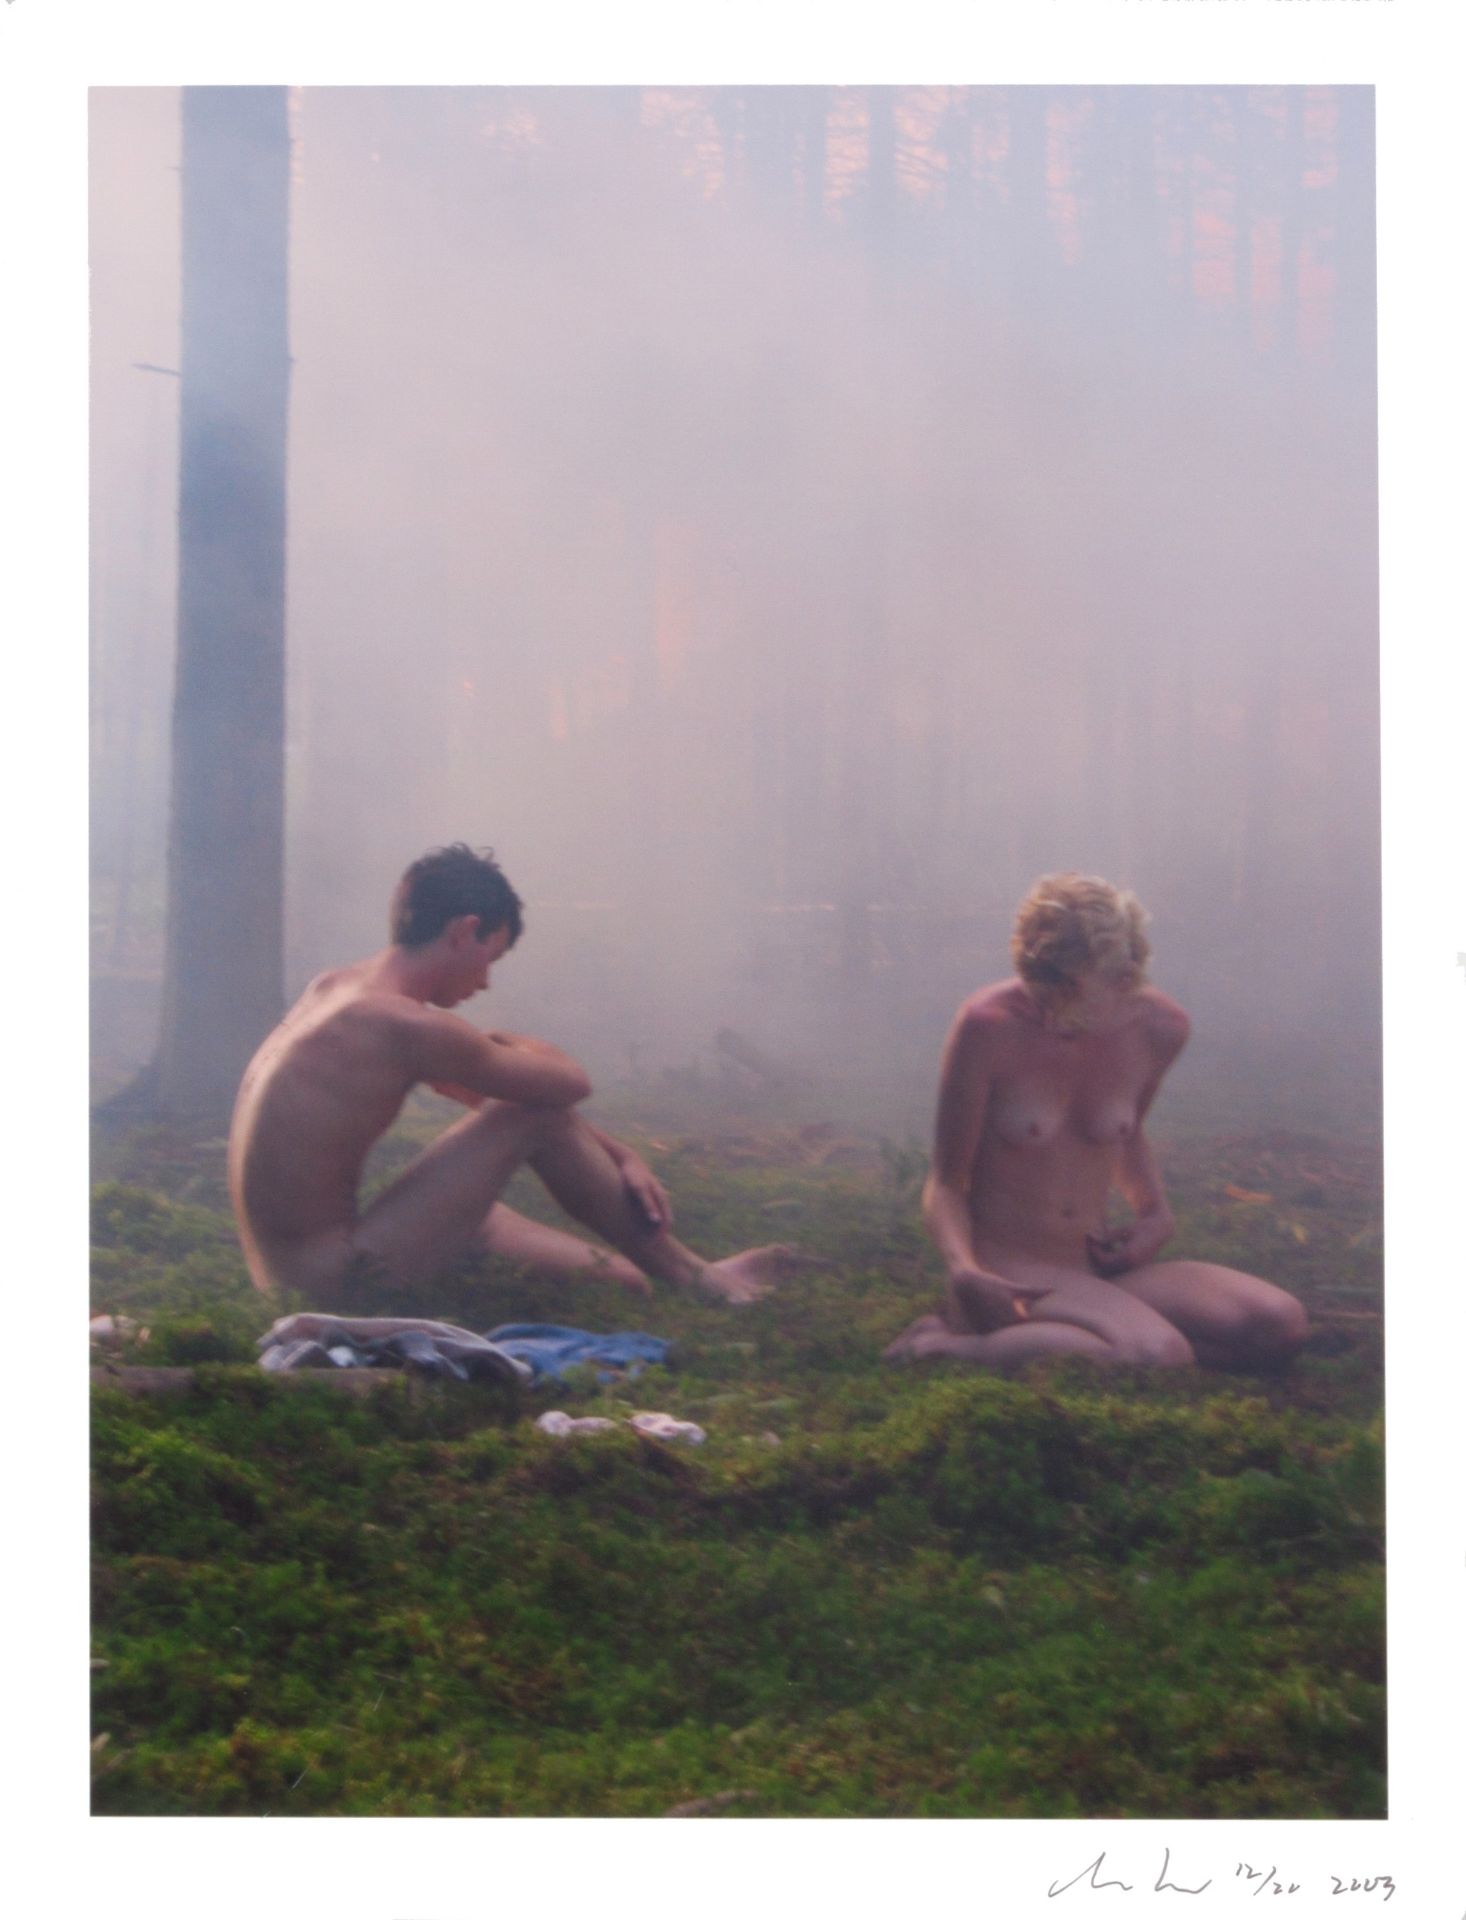 GREGORY CREWDSON. "PRODUCTION STILL (KIM AND GREG), 2003" - Image 2 of 2